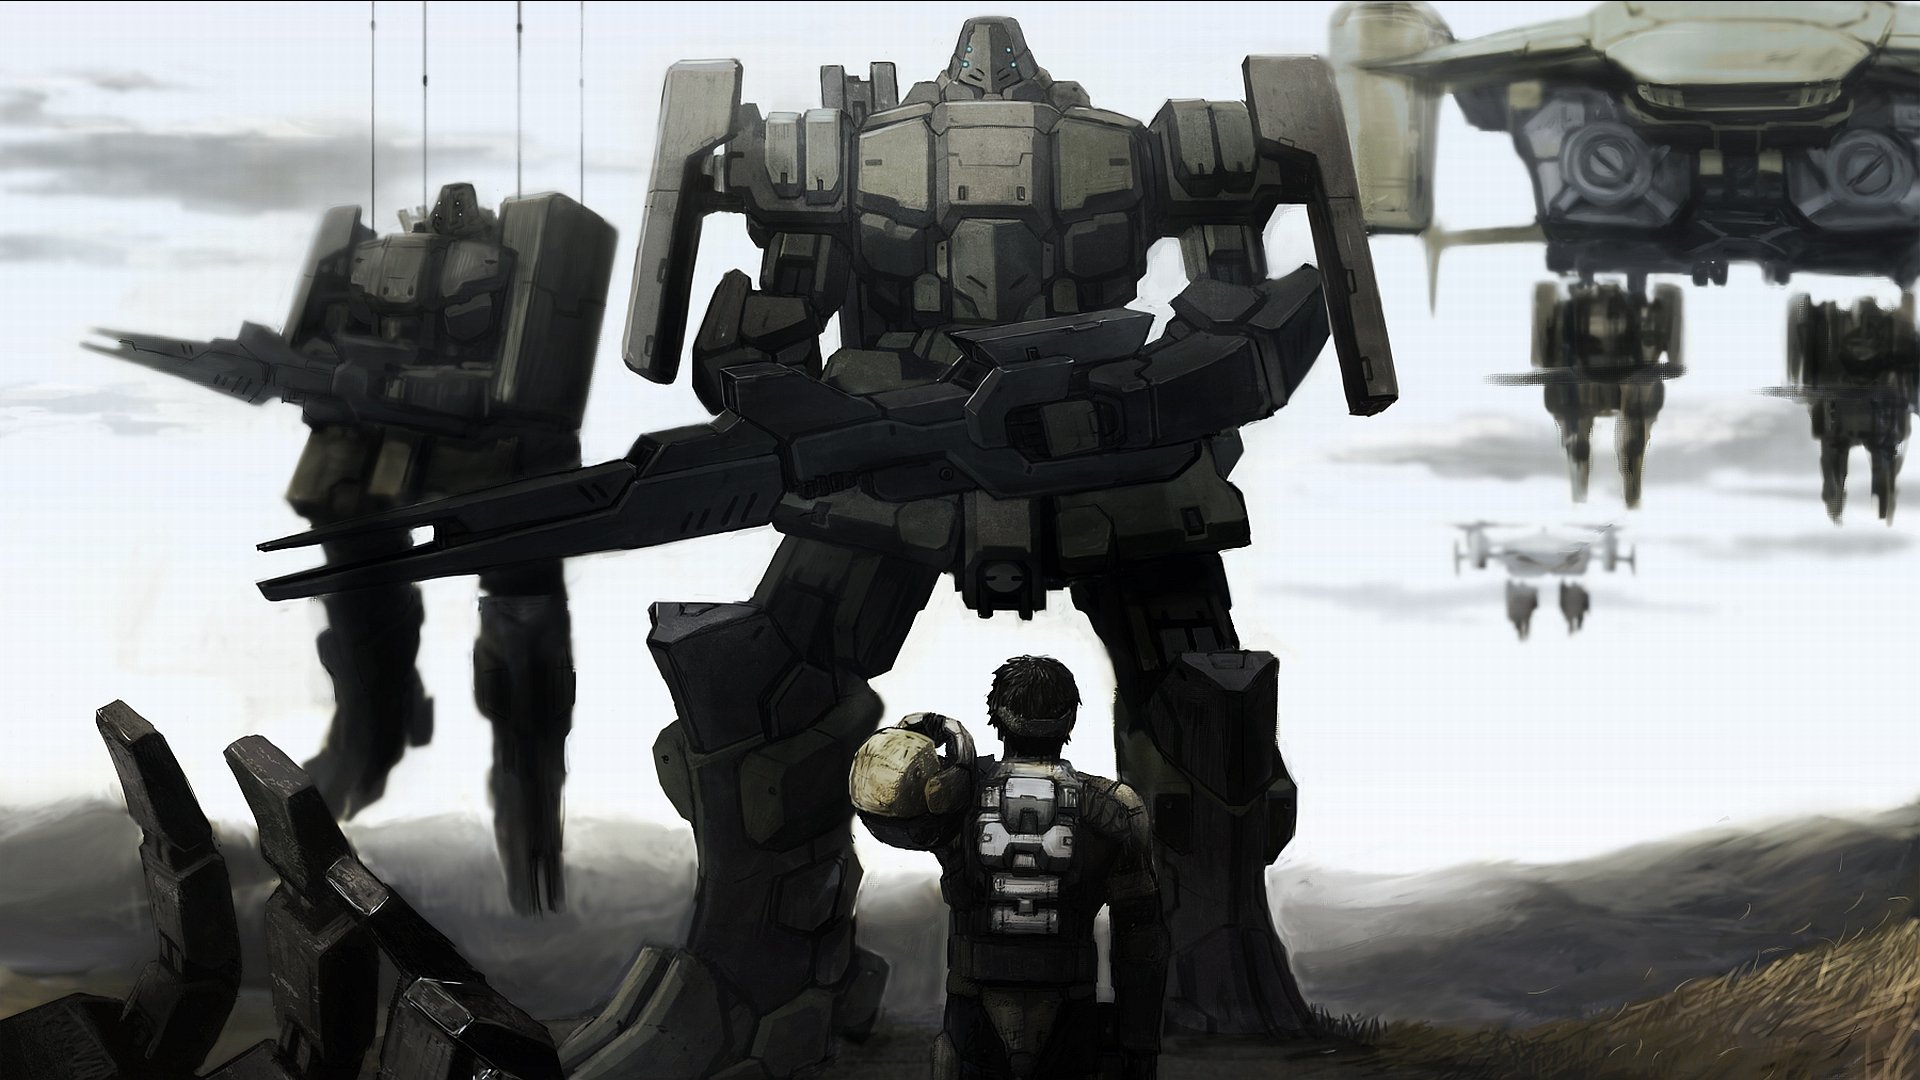 Mech Full HD Wallpaper and Background Image | 1920x1080 | ID:165496